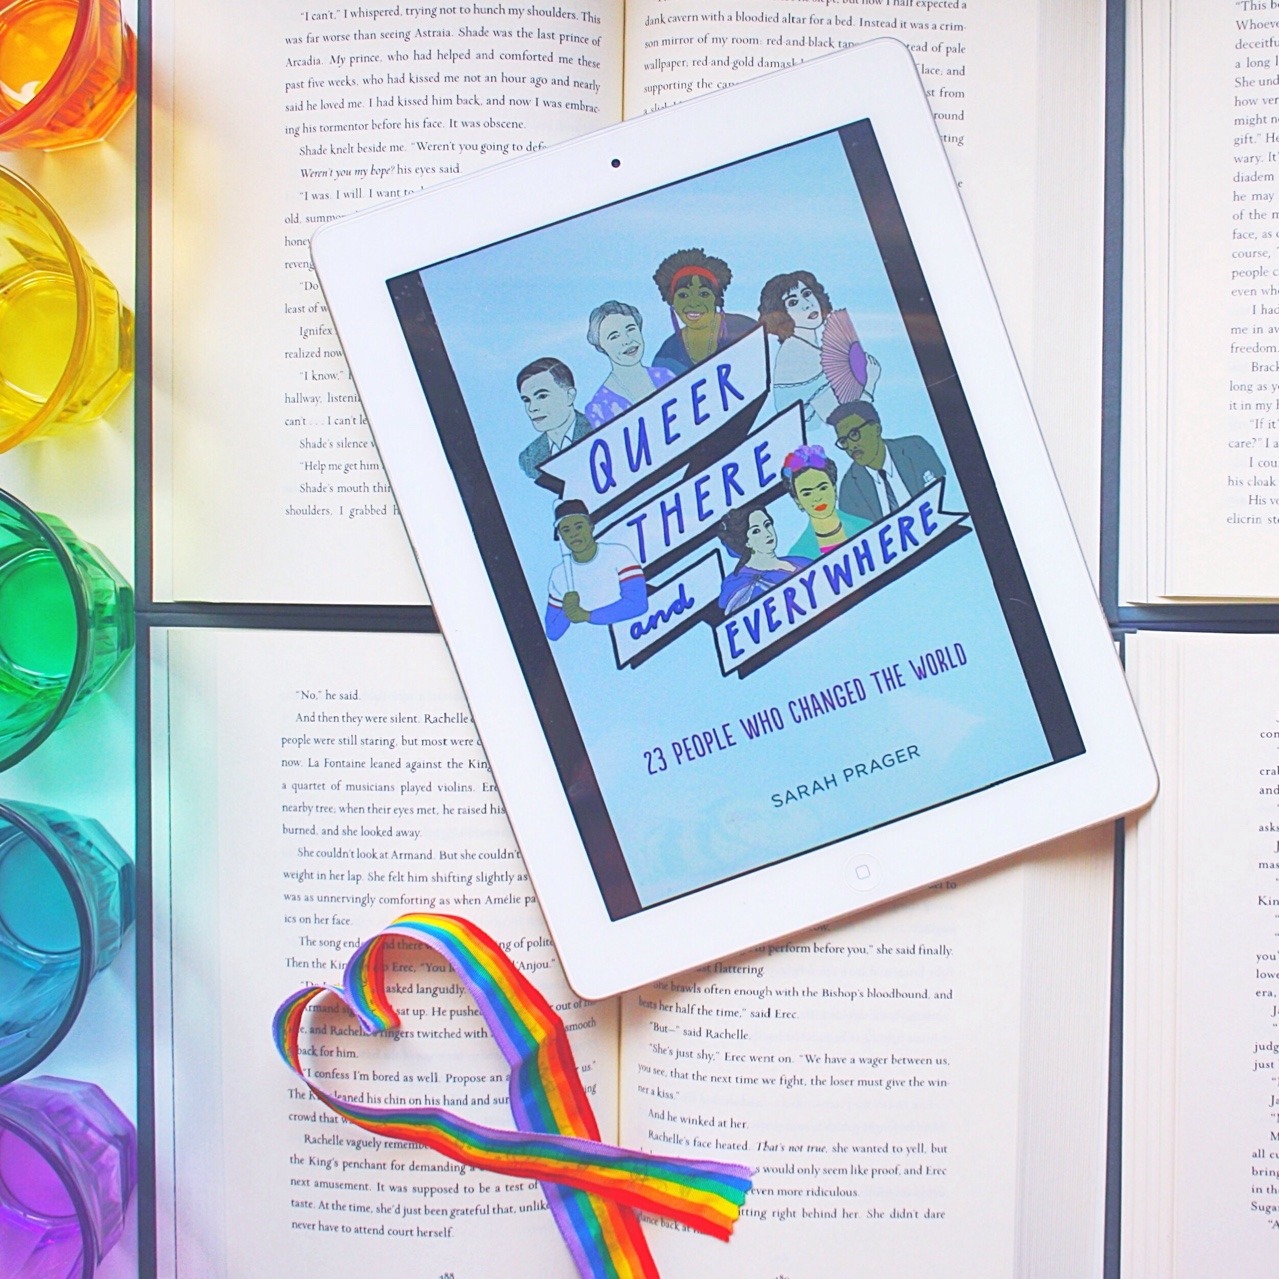 Queer, There, and Everywhere by Sarah Prager